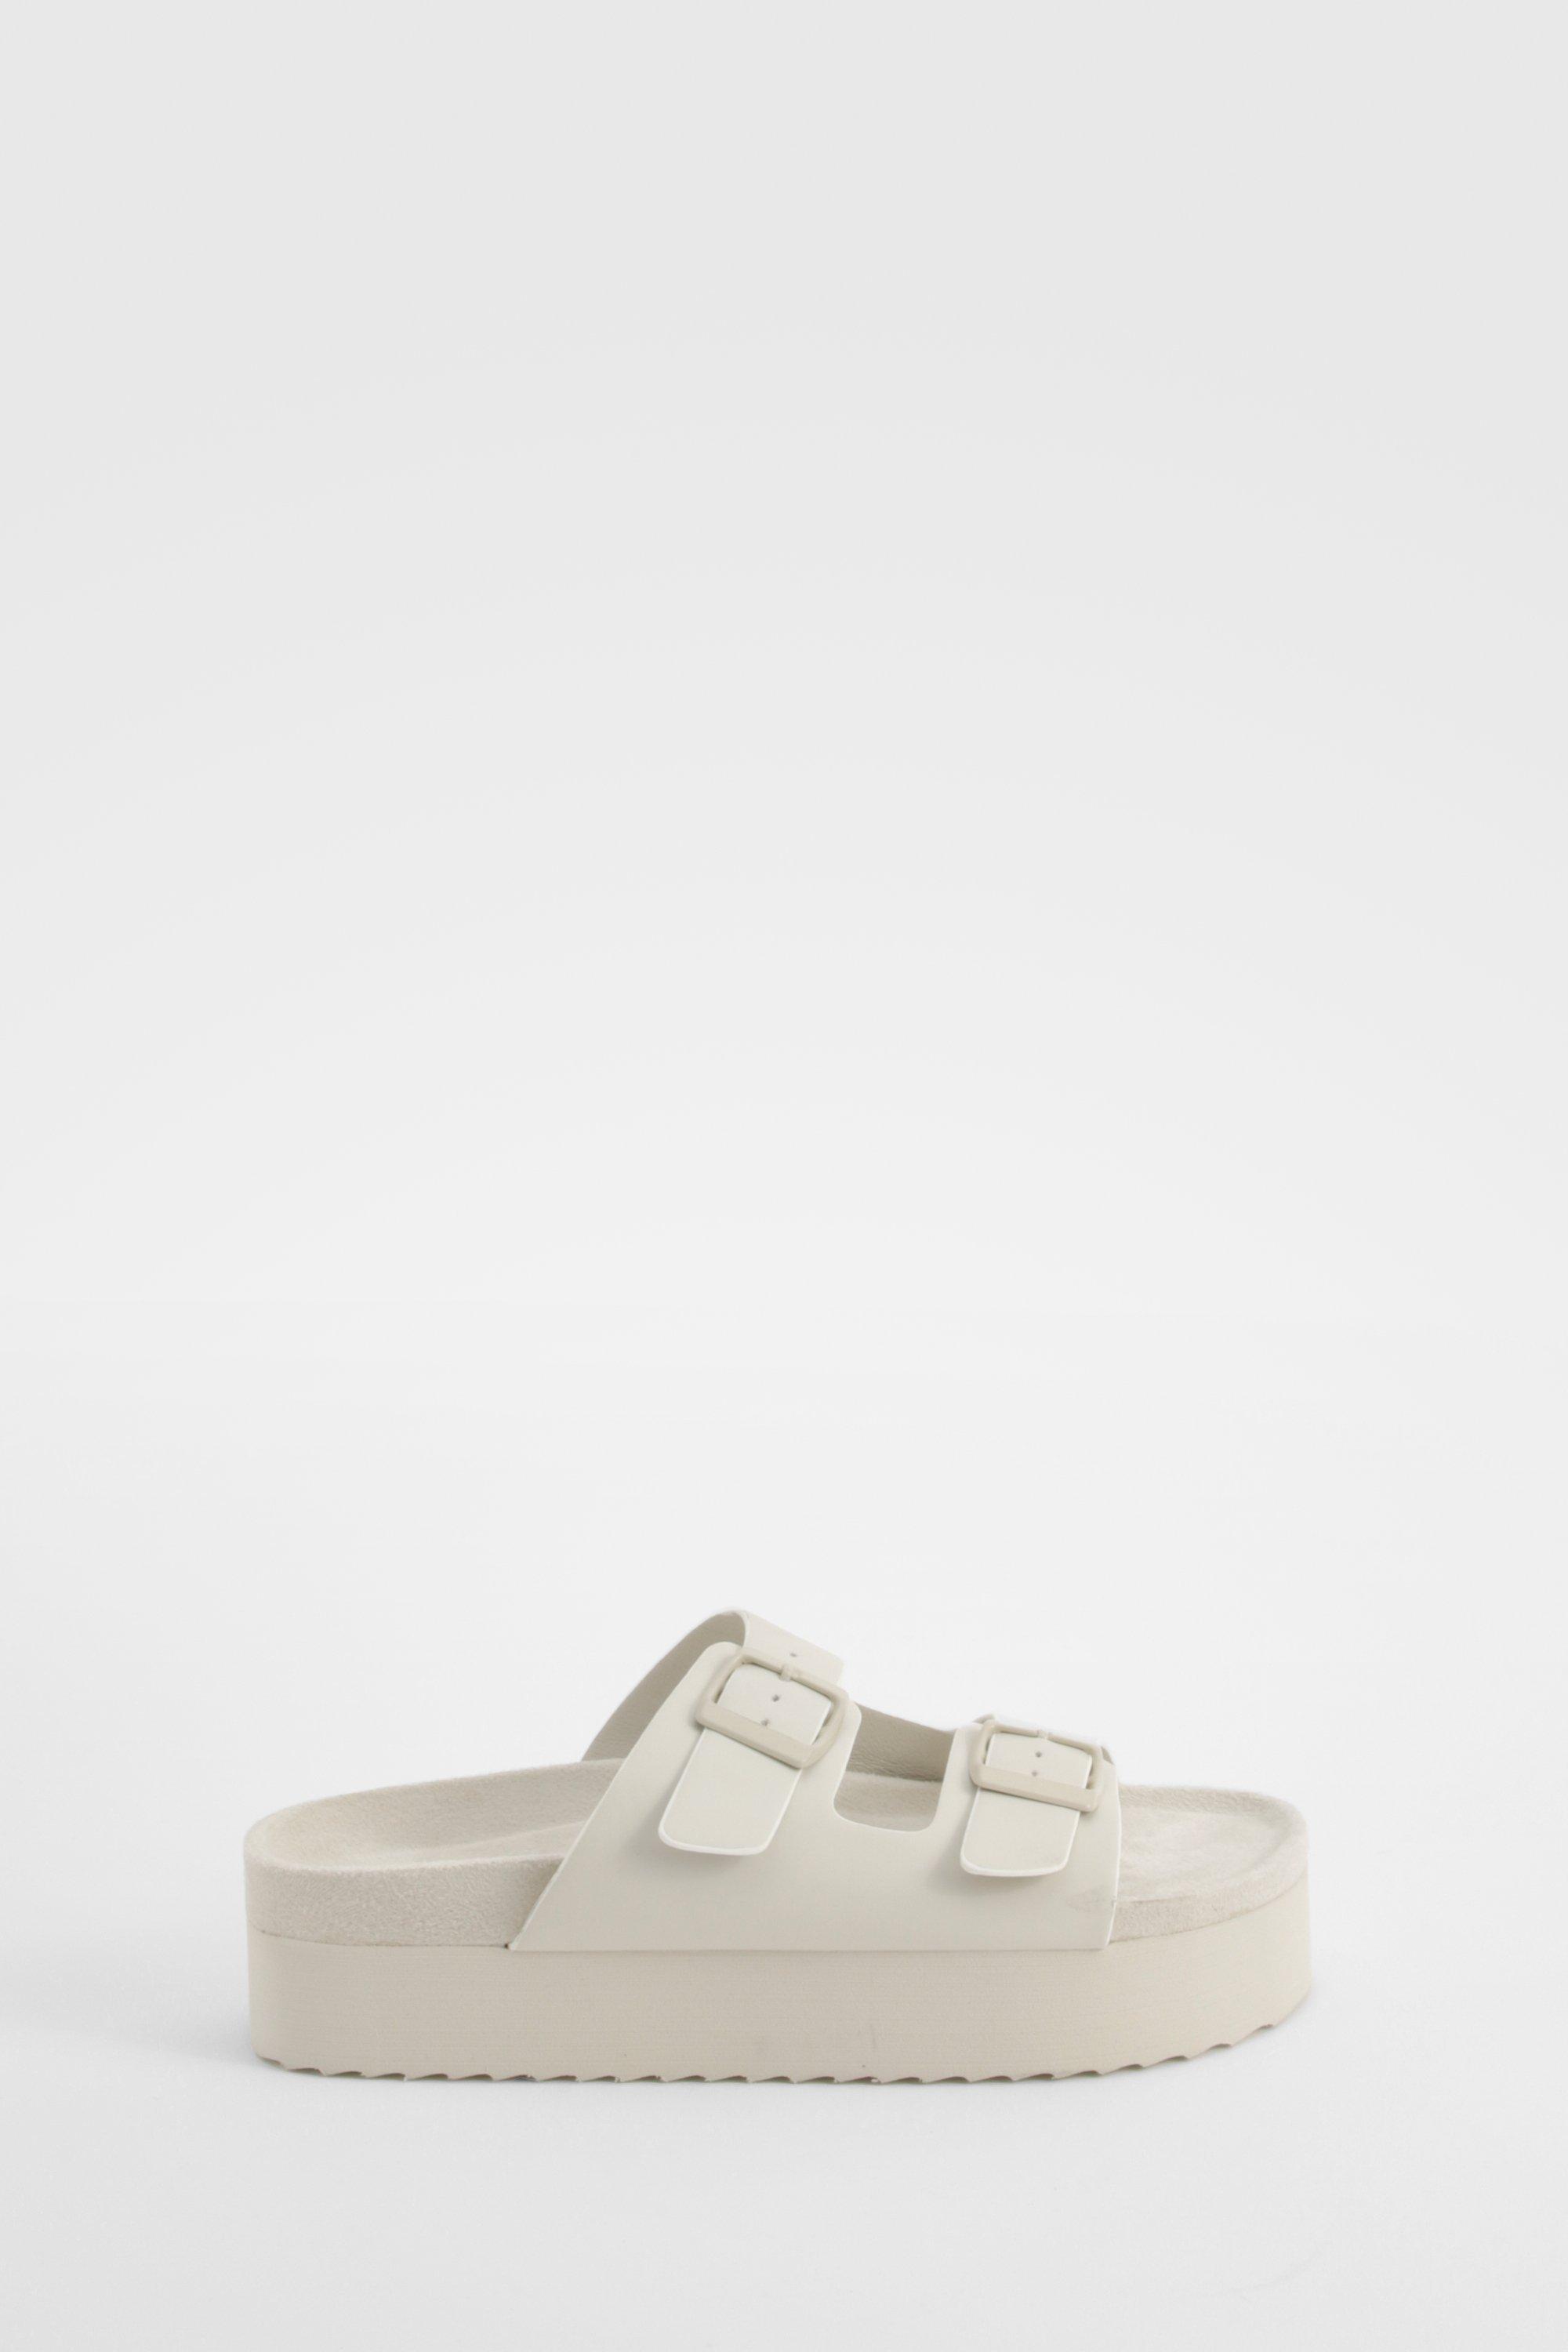 Double Buckle Sliders in White